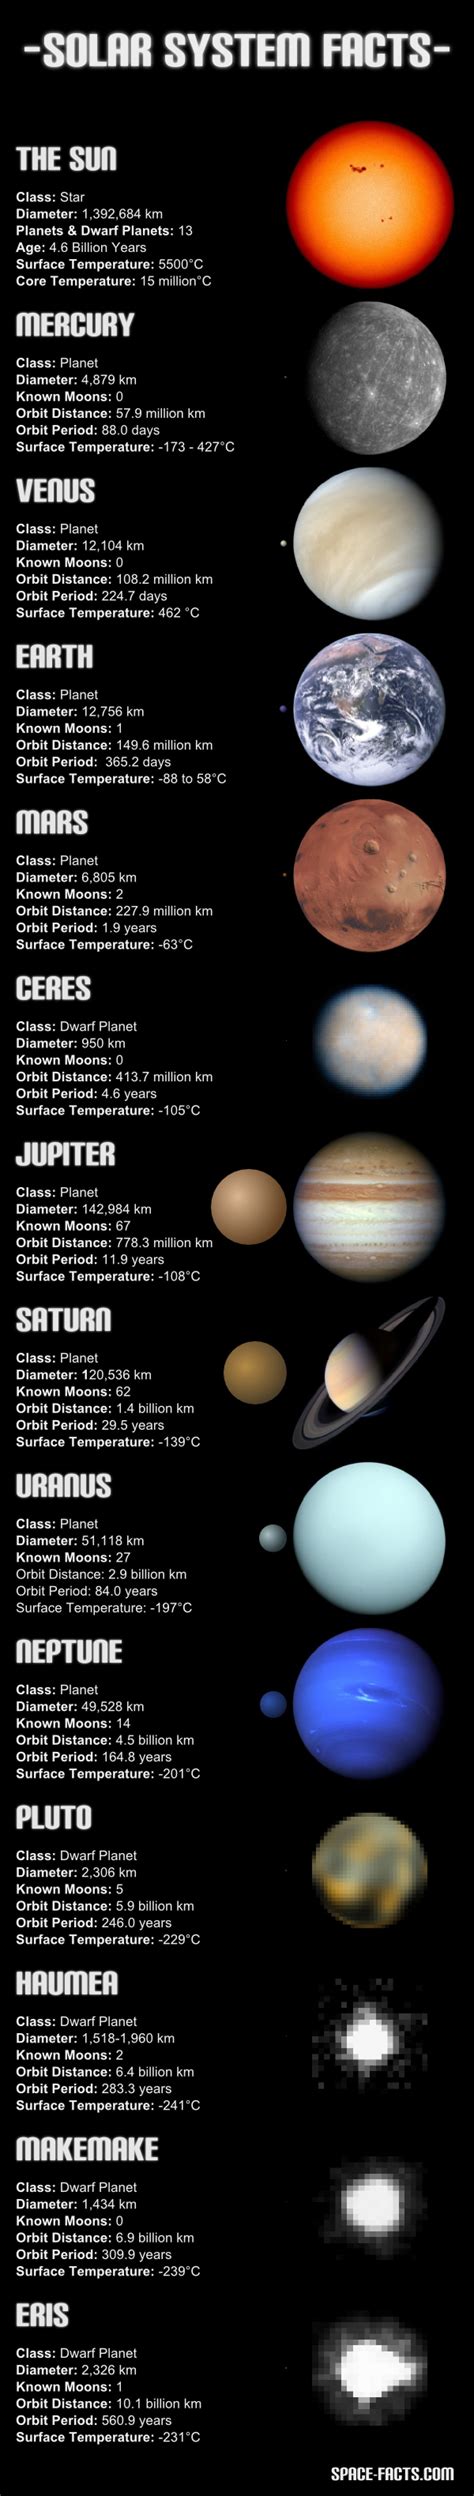 Names Of Dwarf Planets In Our Solar System